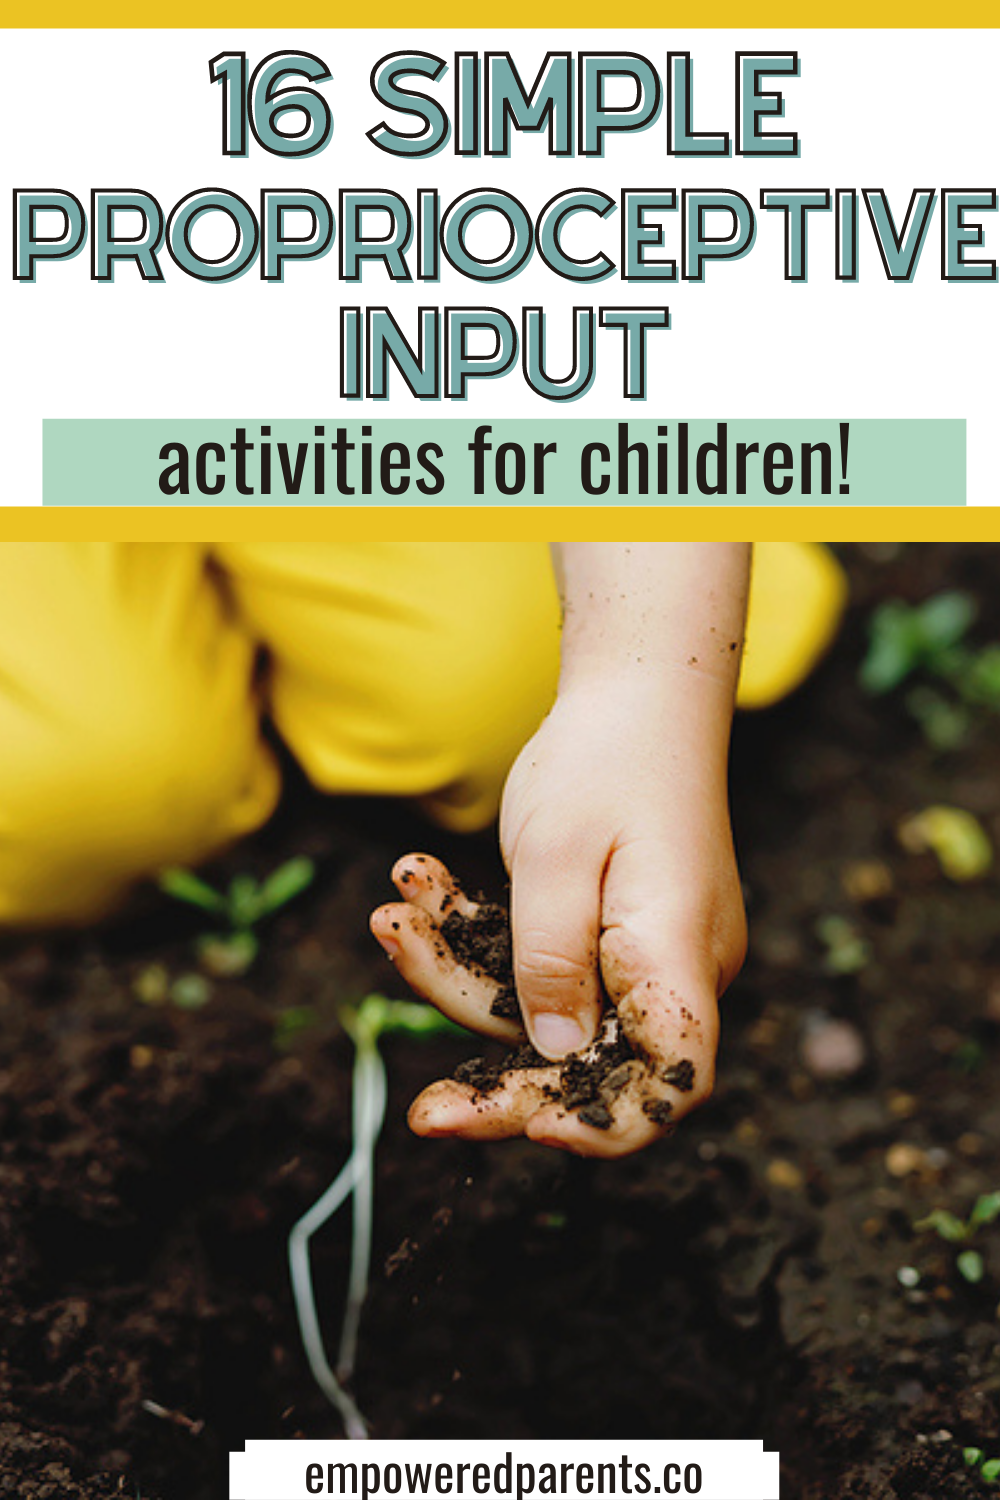 16 simple proprioceptive input activities pin image